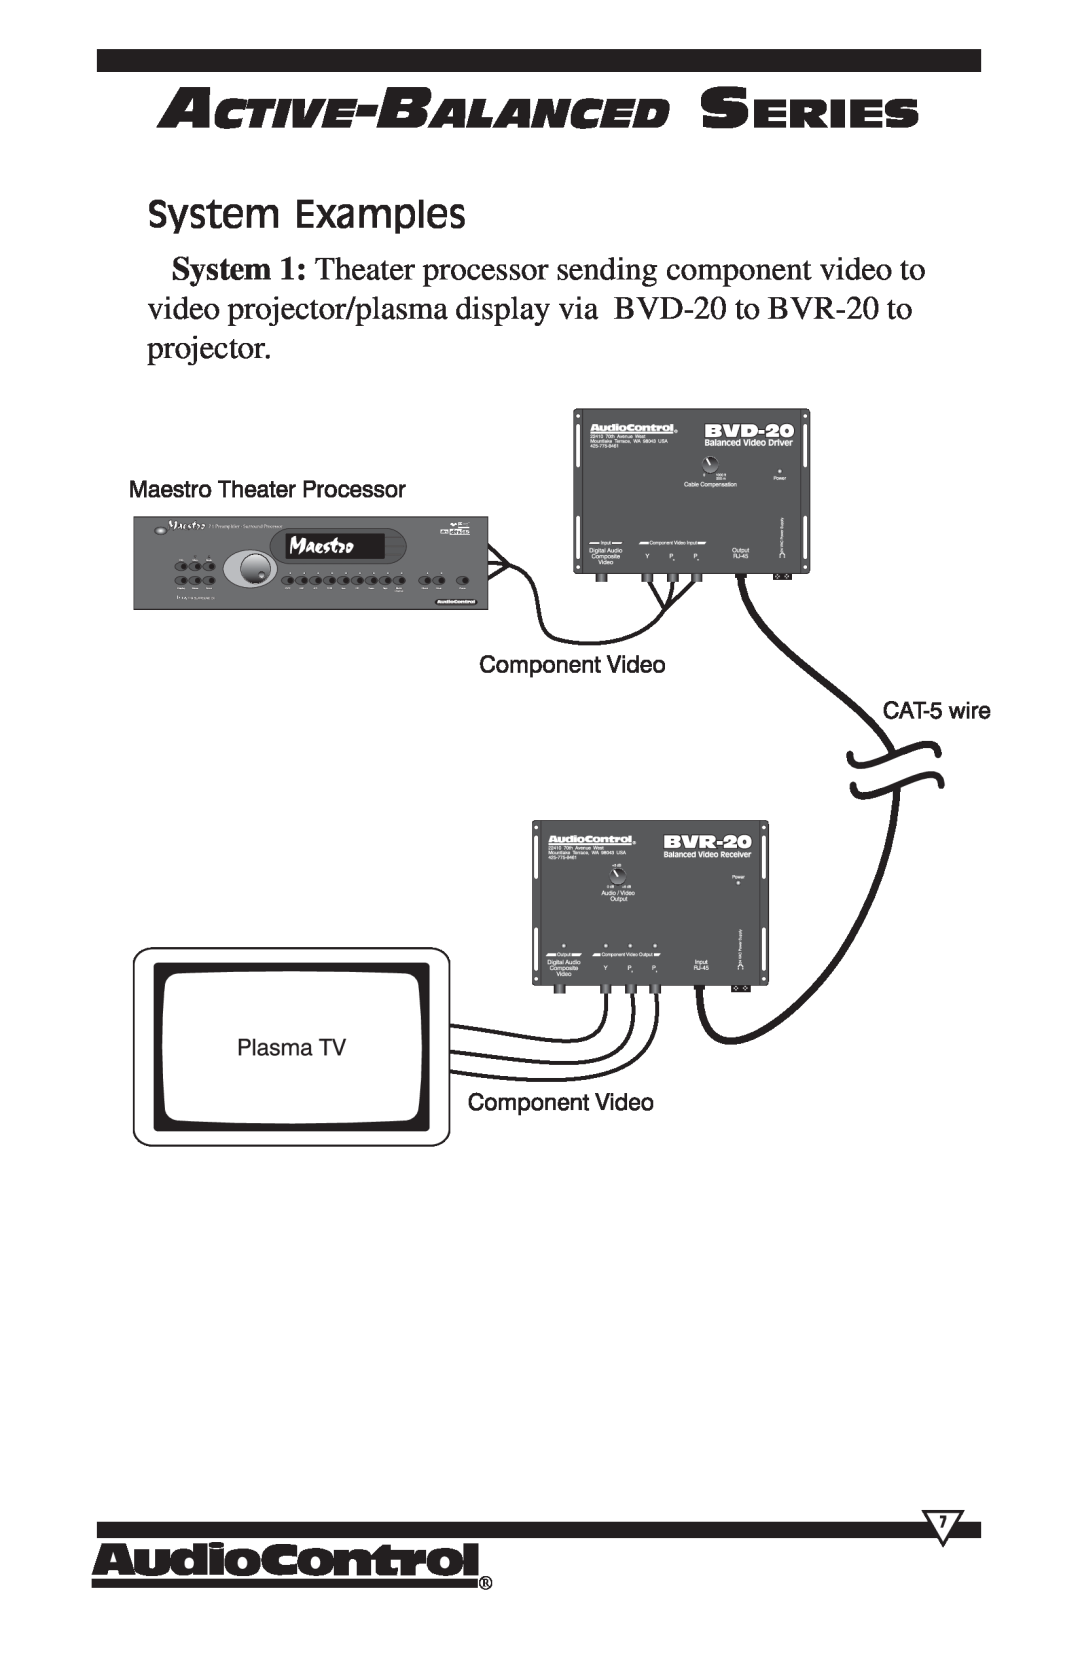 HomeTech BVR-20 operation manual System Examples, Active-Balanced Series 